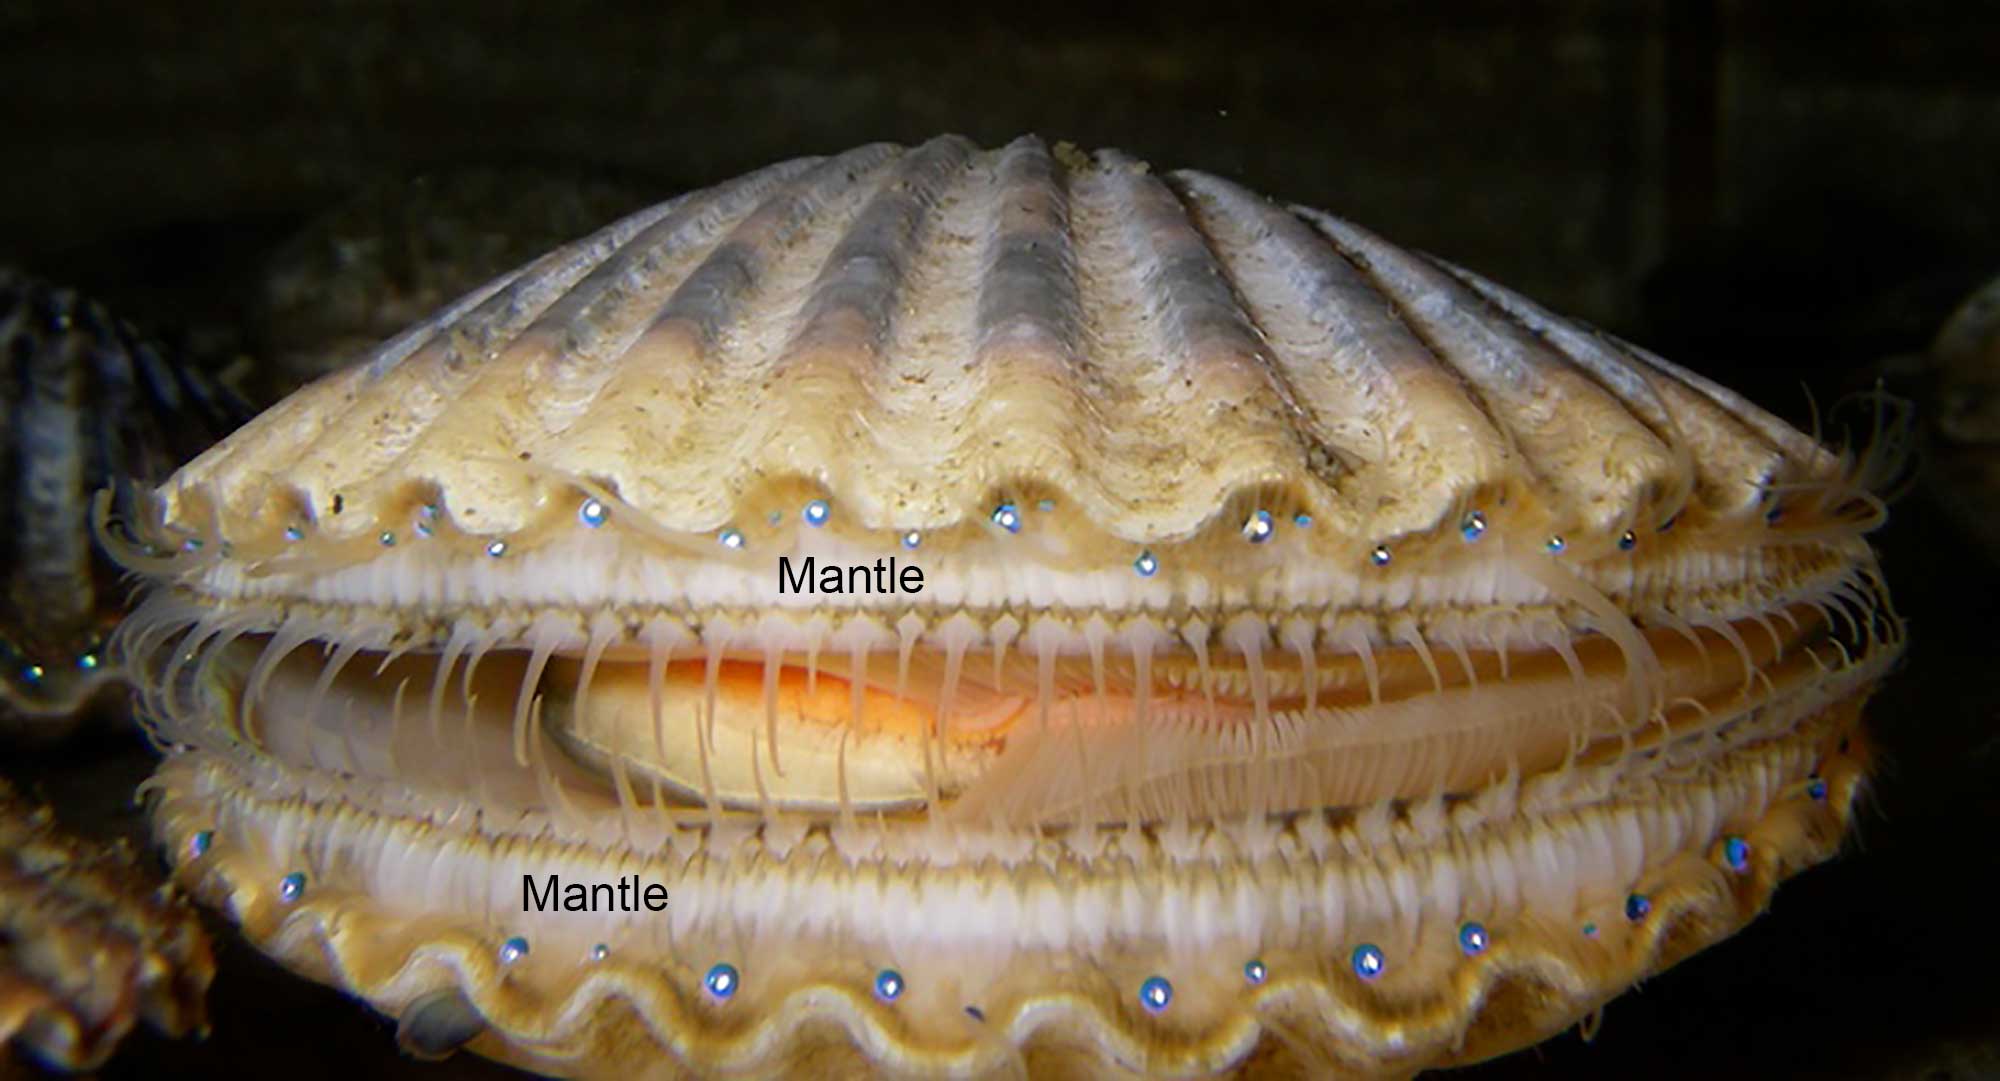 Photograph of a live scallop with its mantle (which bears eyes) labeled.